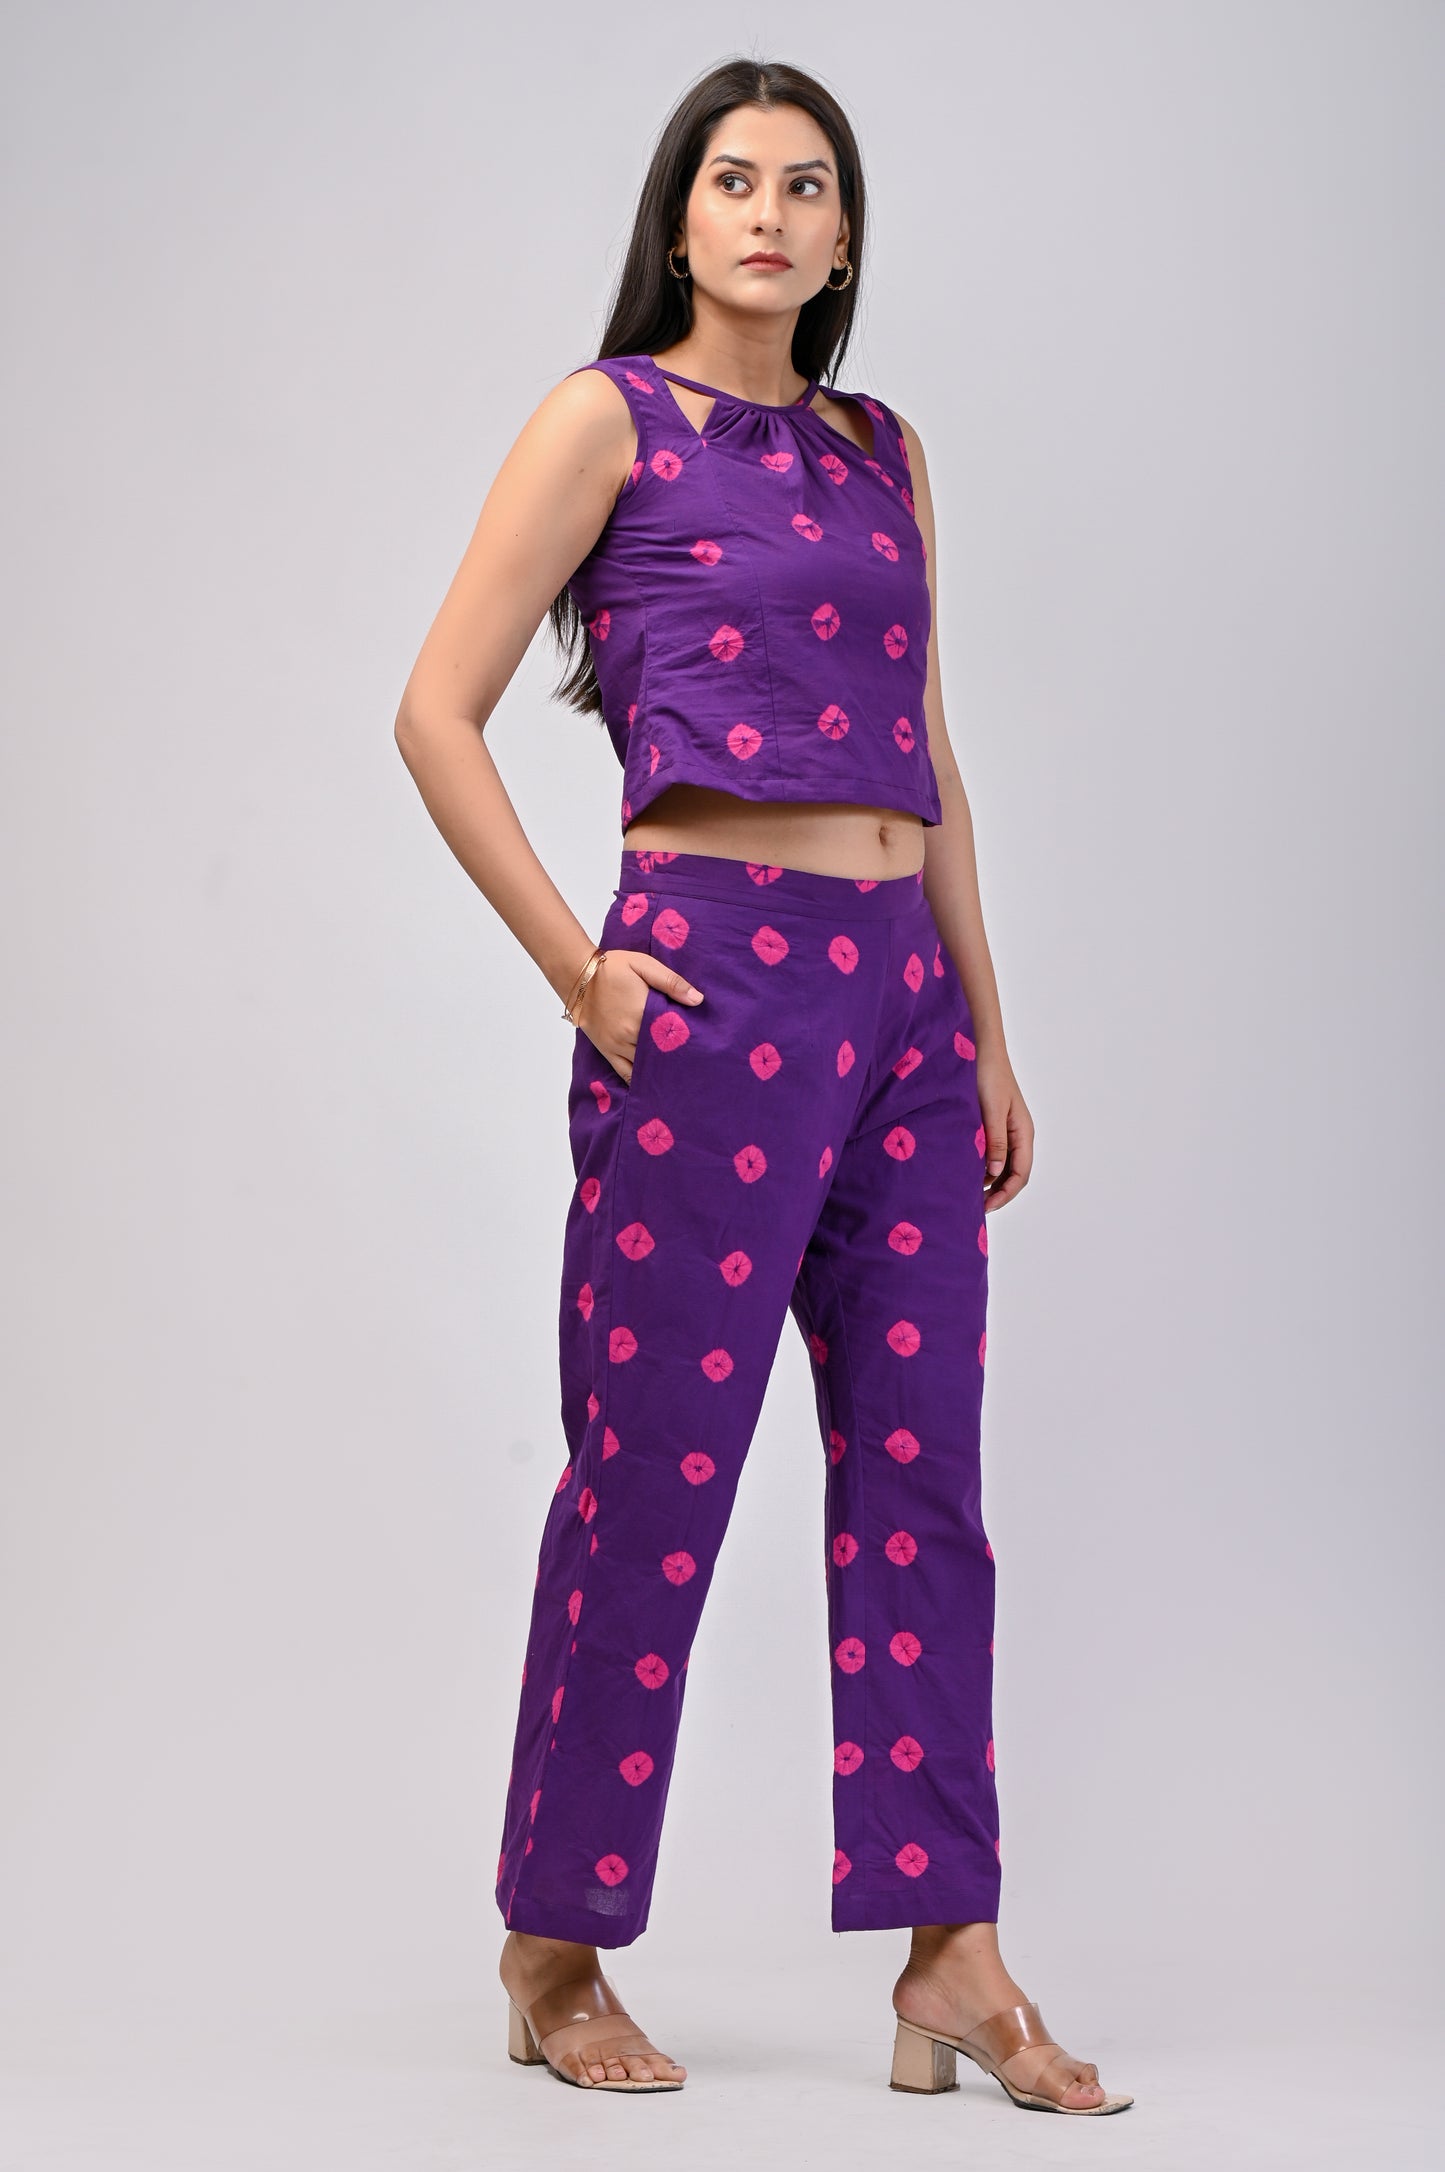 summer co ord sets for ladies, zara, shorts summer co ord sets meesho co ord sets western summer co ord sets india co ord sets h&m 3 piece co ord set women summer co ord sets women casual summer co ord sets women plus size summer co ord sets women summer co ord sets zara co ords trouser set co ord sets western ethnic co ord sets